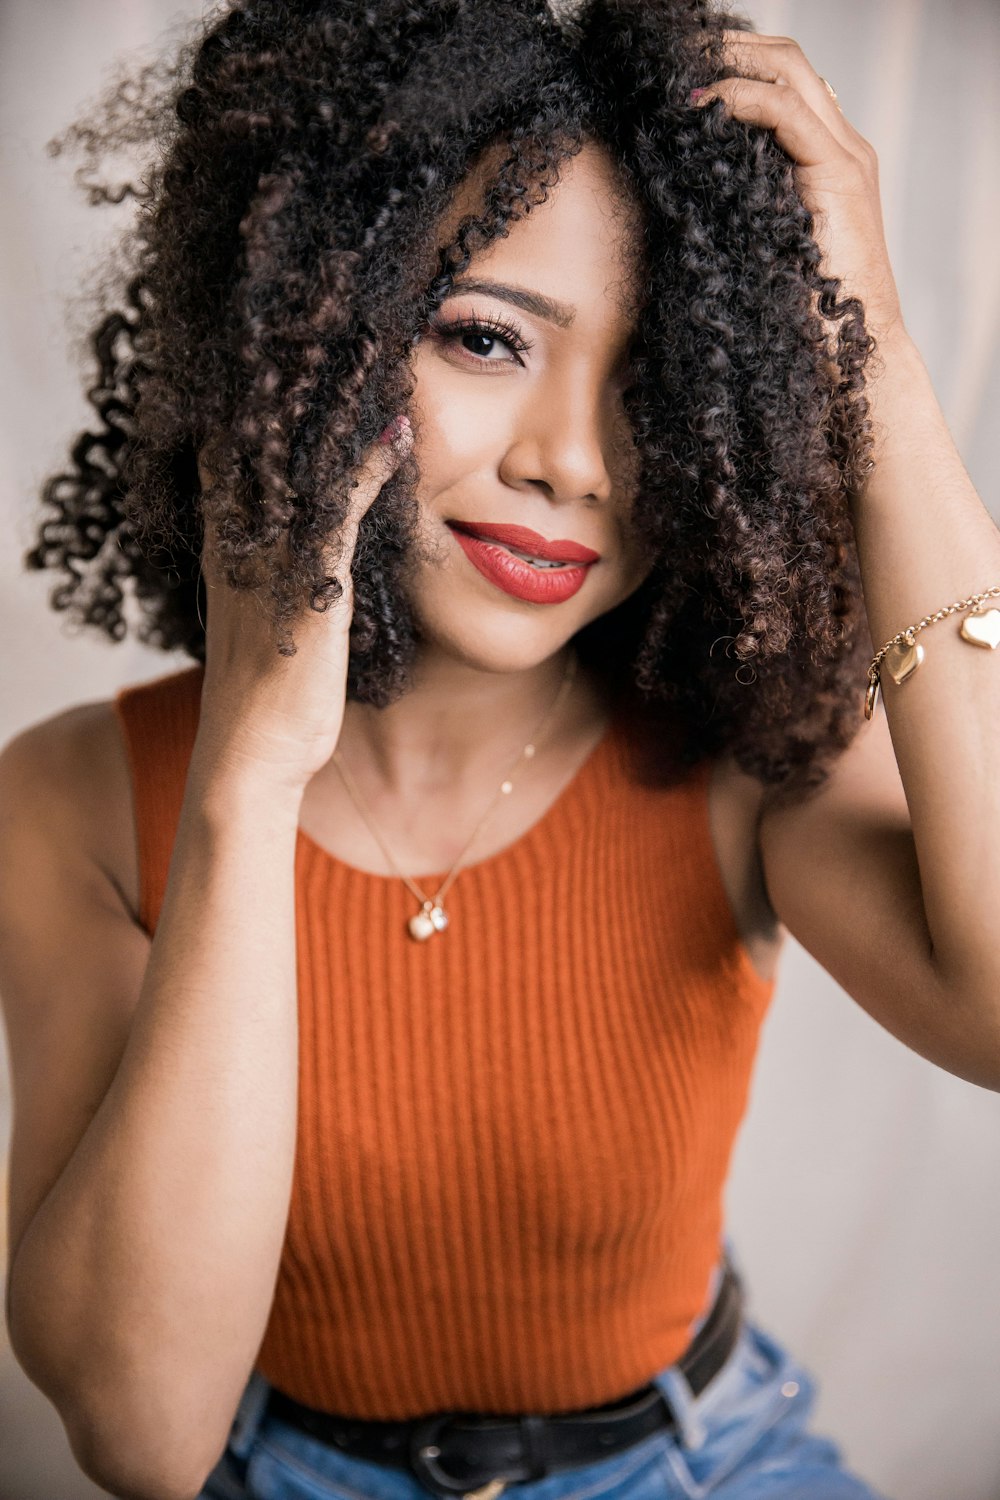 a woman with curly hair posing for a picture